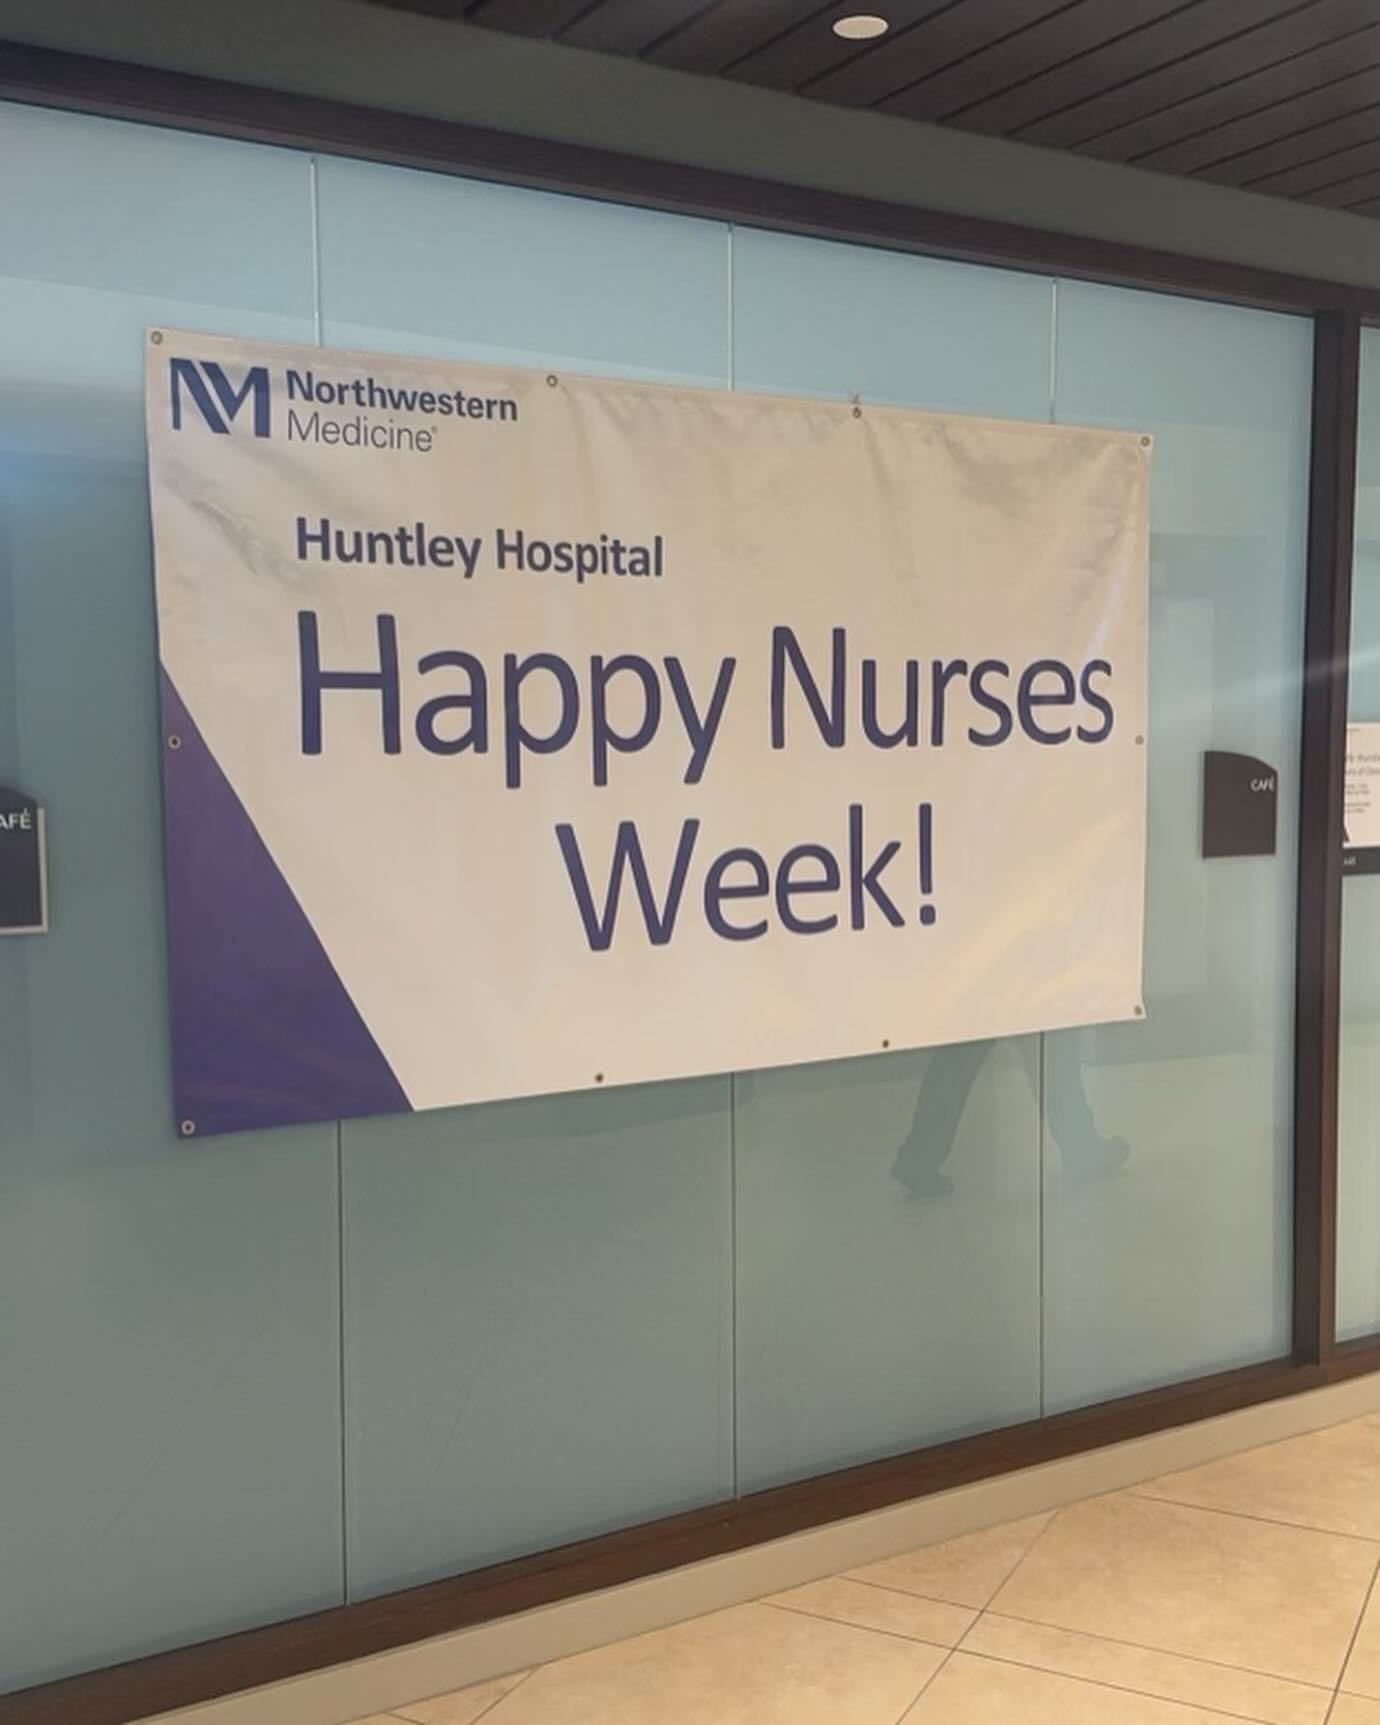 Happy nurses week! Our staff got to help give thanks to the nurses at Northwestern hospital- Huntley!